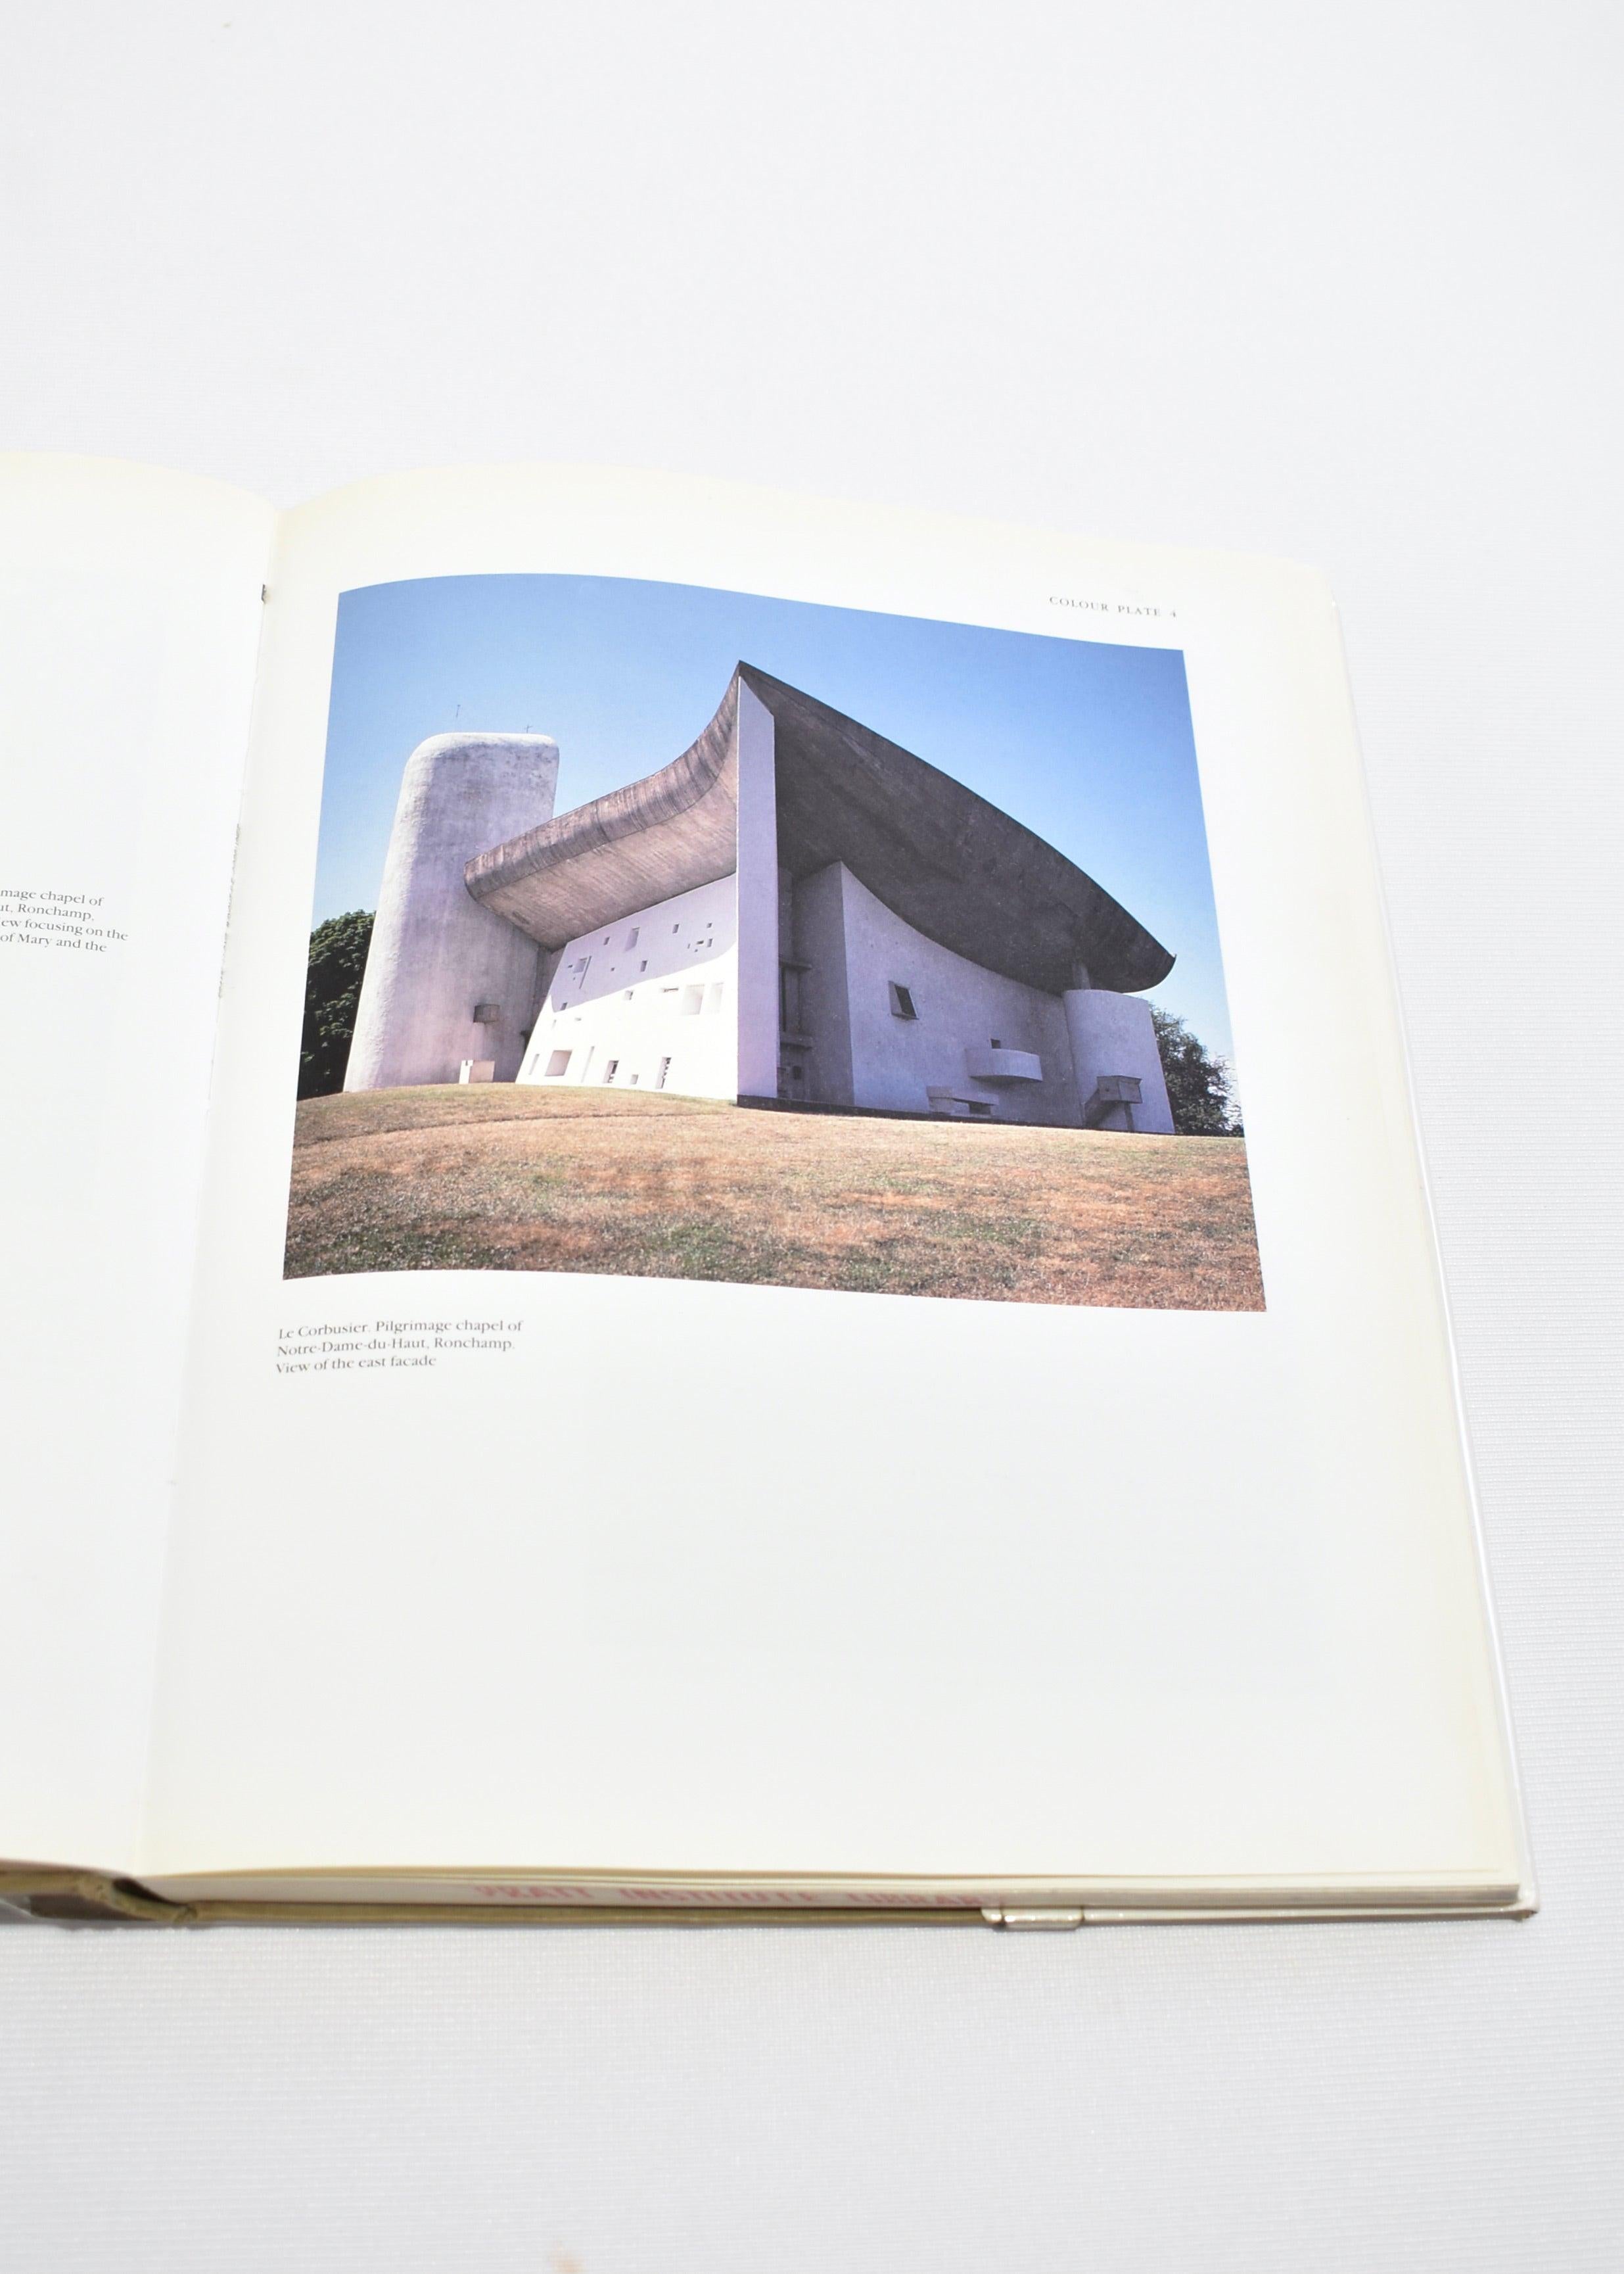 Vintage hardback coffee table book featuring world renowned architects, Le Corbusier and Frank Lloyd Wright. By Richard A. Etlin, published in 1994. First edition, 222 pages.

